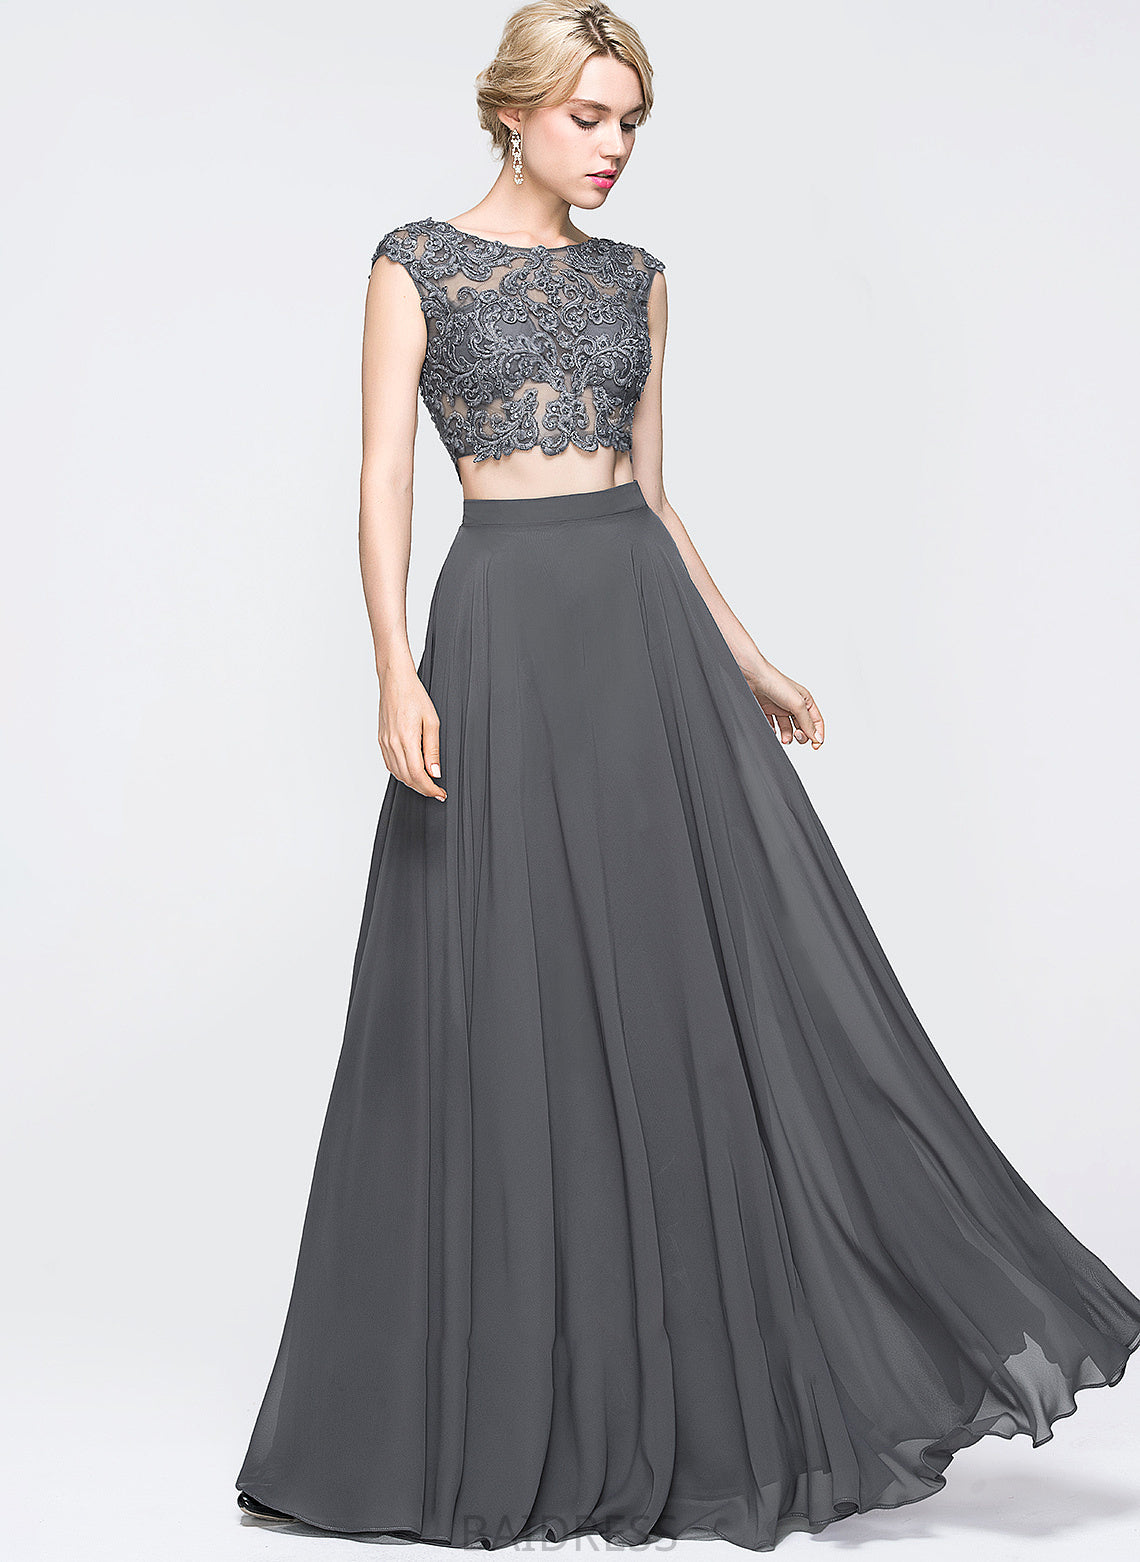 Amara With Beading Chiffon Floor-Length Prom Dresses Scoop A-Line Neck Sequins